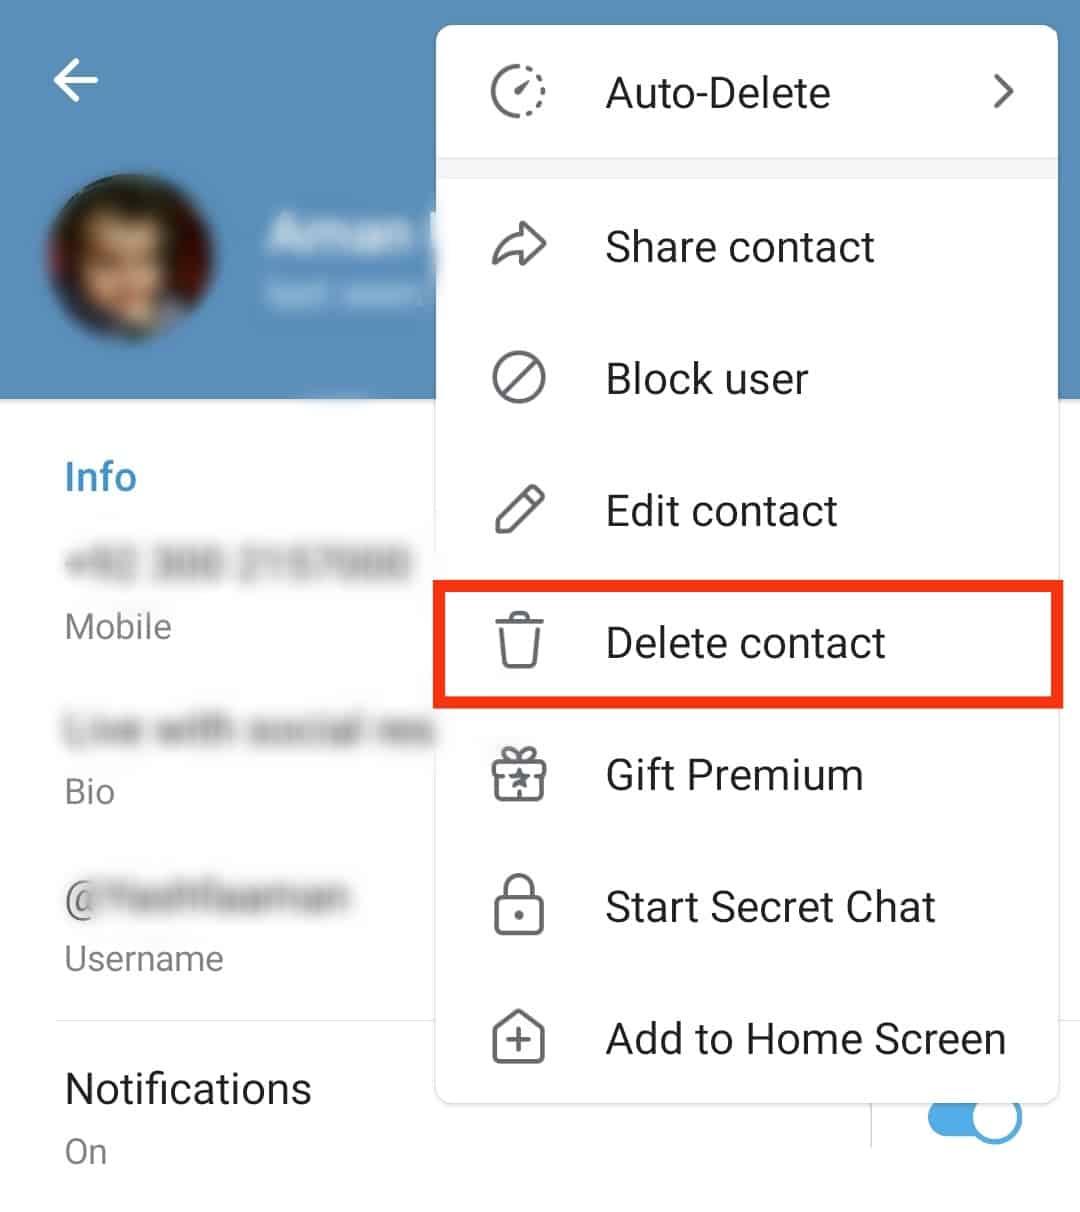 Tap On Delete Contact.